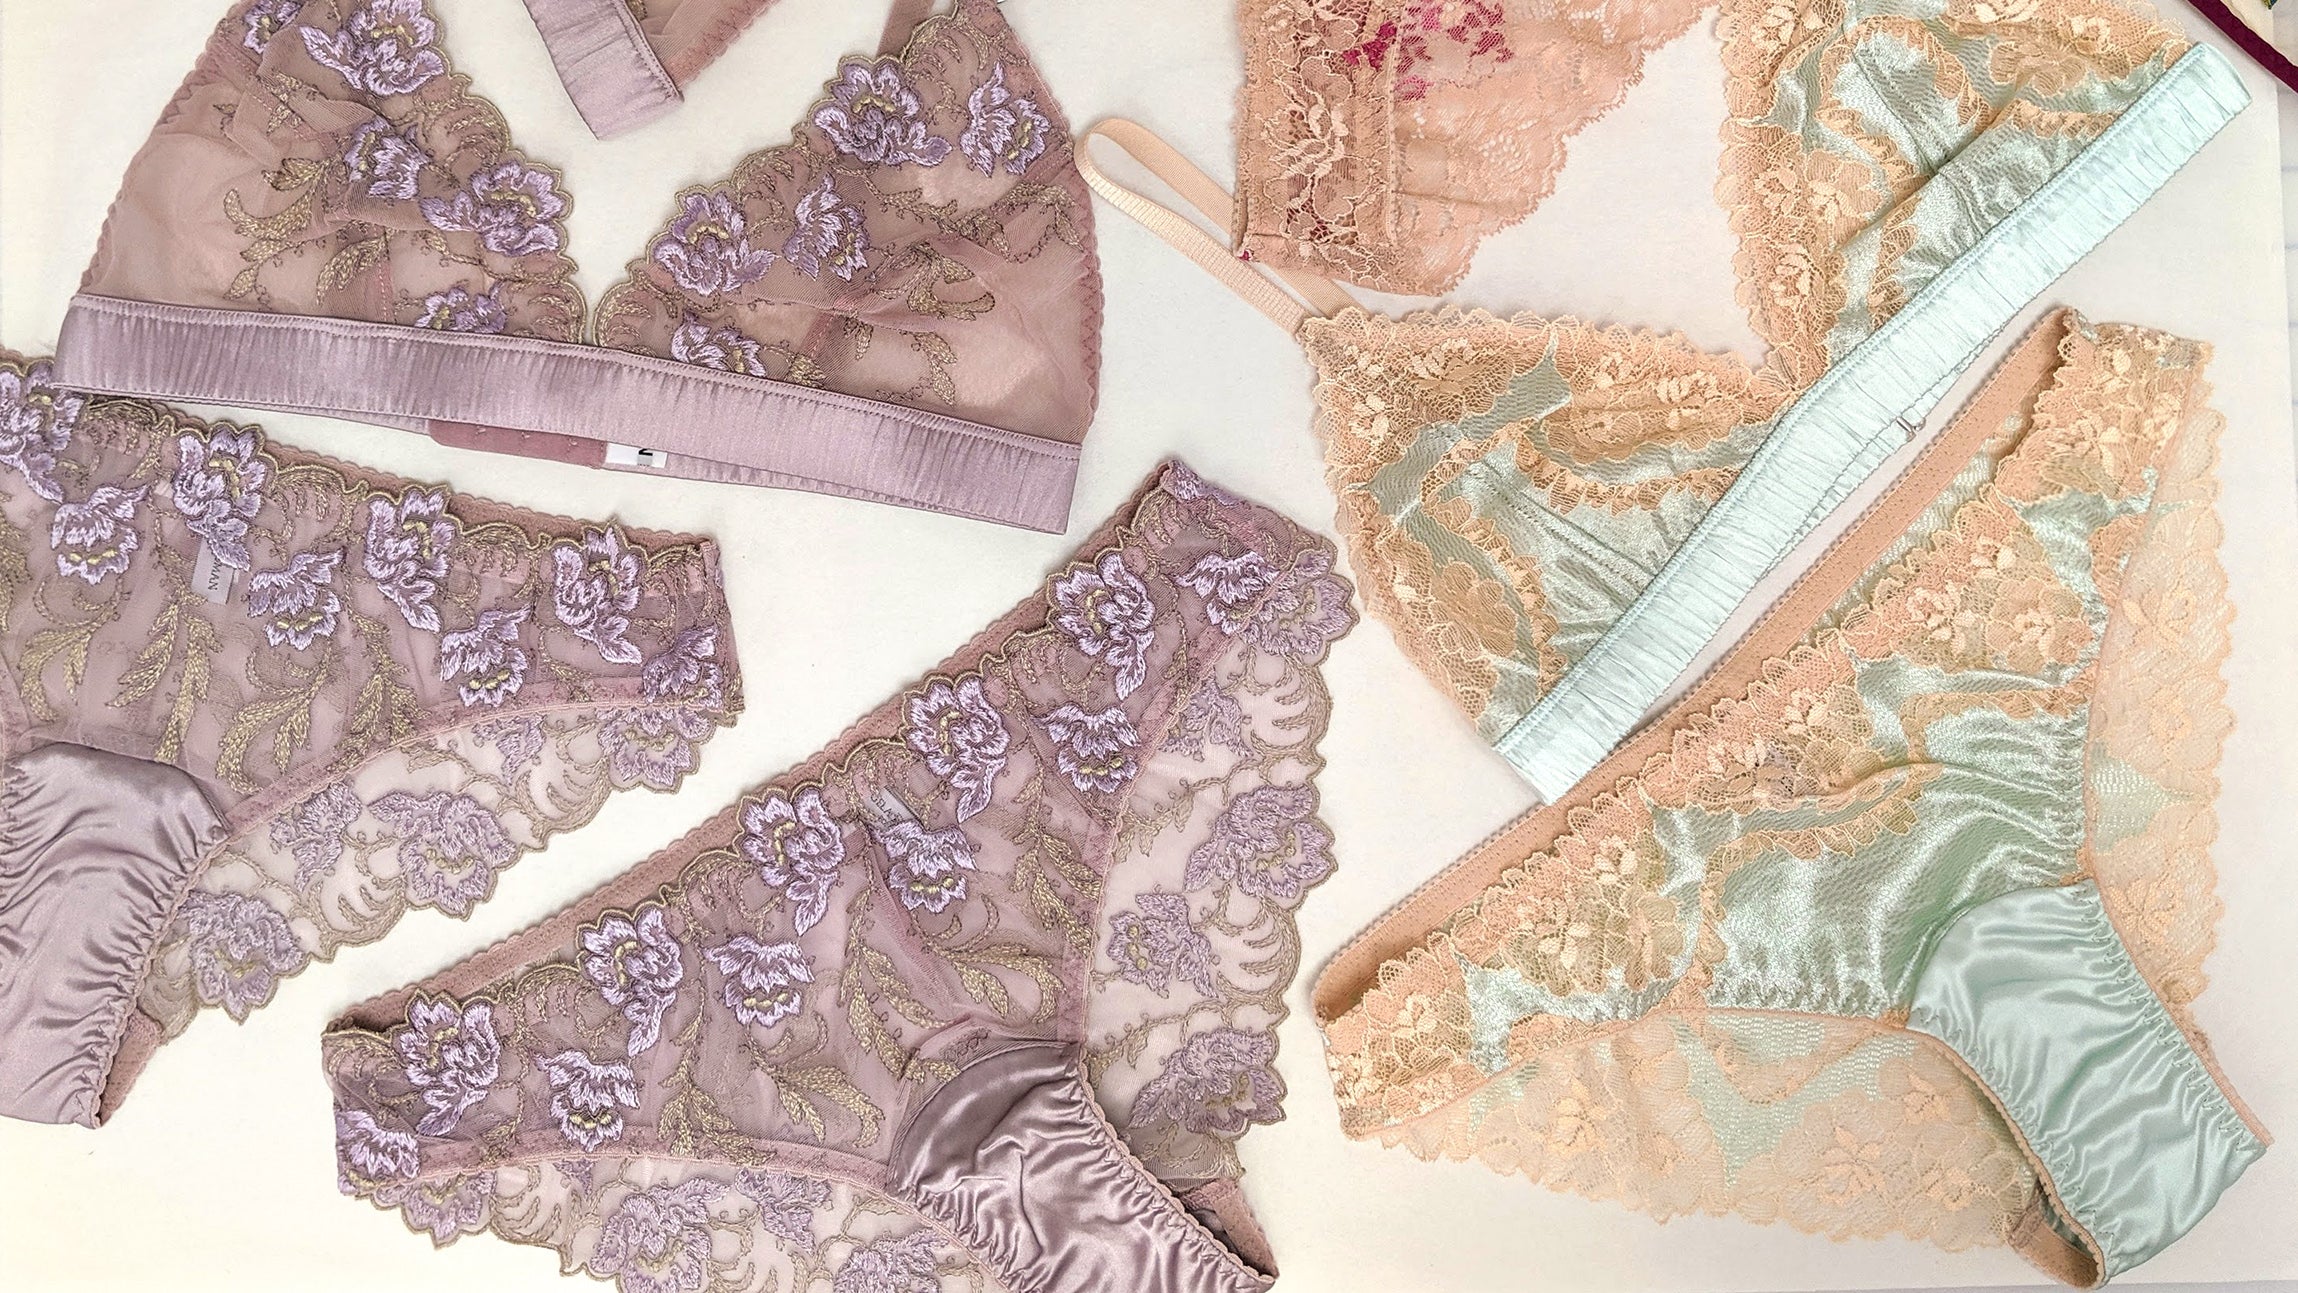 Pastel lace lingerie sets in lilac purple and mint green, with pretty stretch lace and embroideries